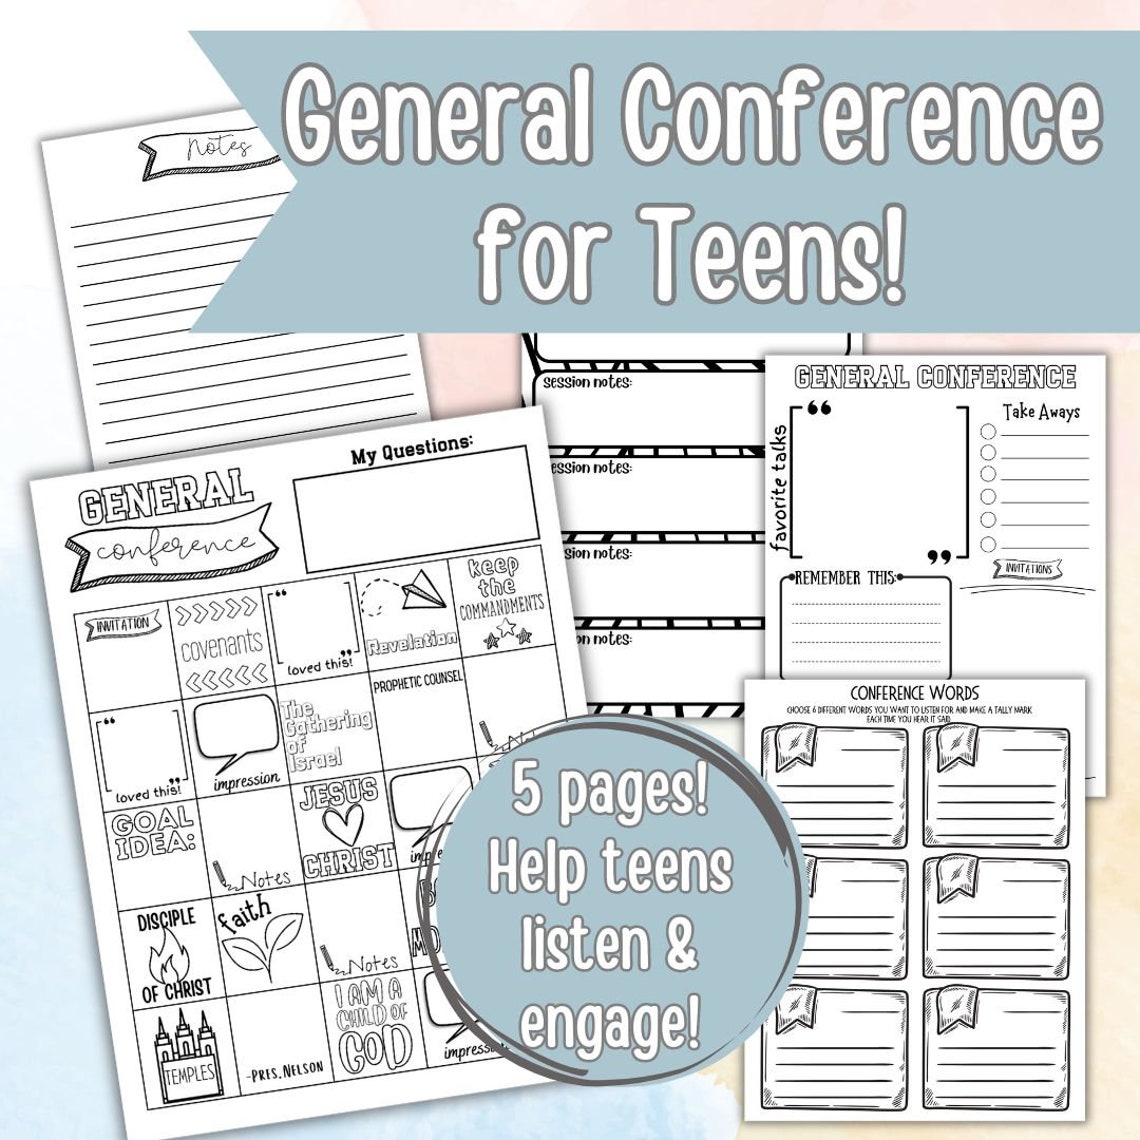 printable worksheets for teens for LDS general conference for the church of jesus christ of latter day saints fun and engaging ways to help teens take notes and have fun during general conference, conference squares, conference journal, notes